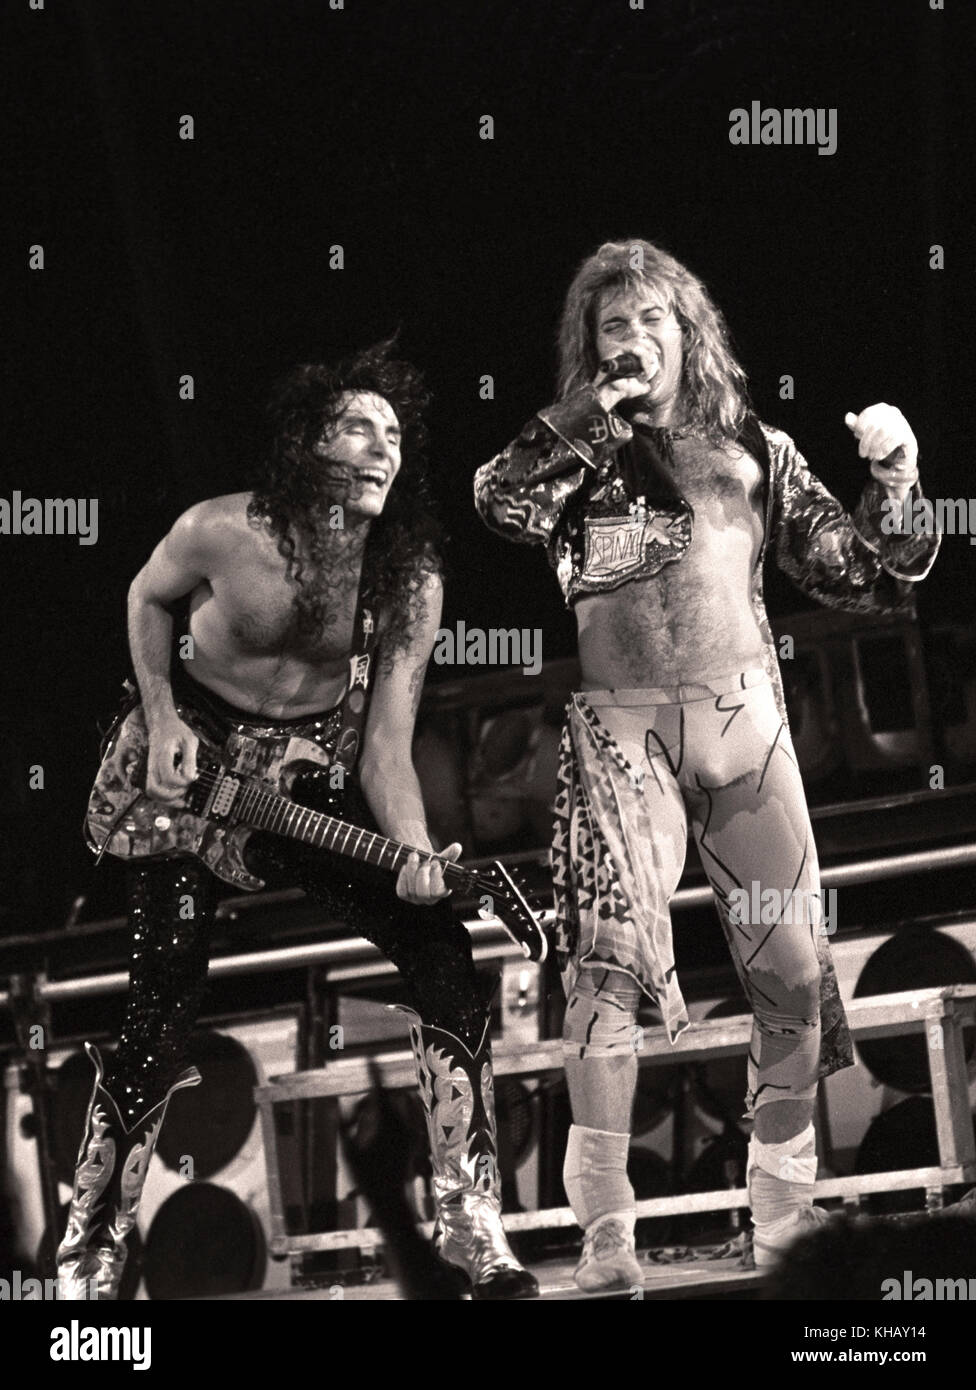 David Lee Roth Band featuring Steve Vai and Billy Sheehan performing at the  Rosemoint Horizion in Rosemont, Illinois. ,1986 © Gene Ambo /  MediaPunch **NO UK or Japan*** Stock Photo - Alamy